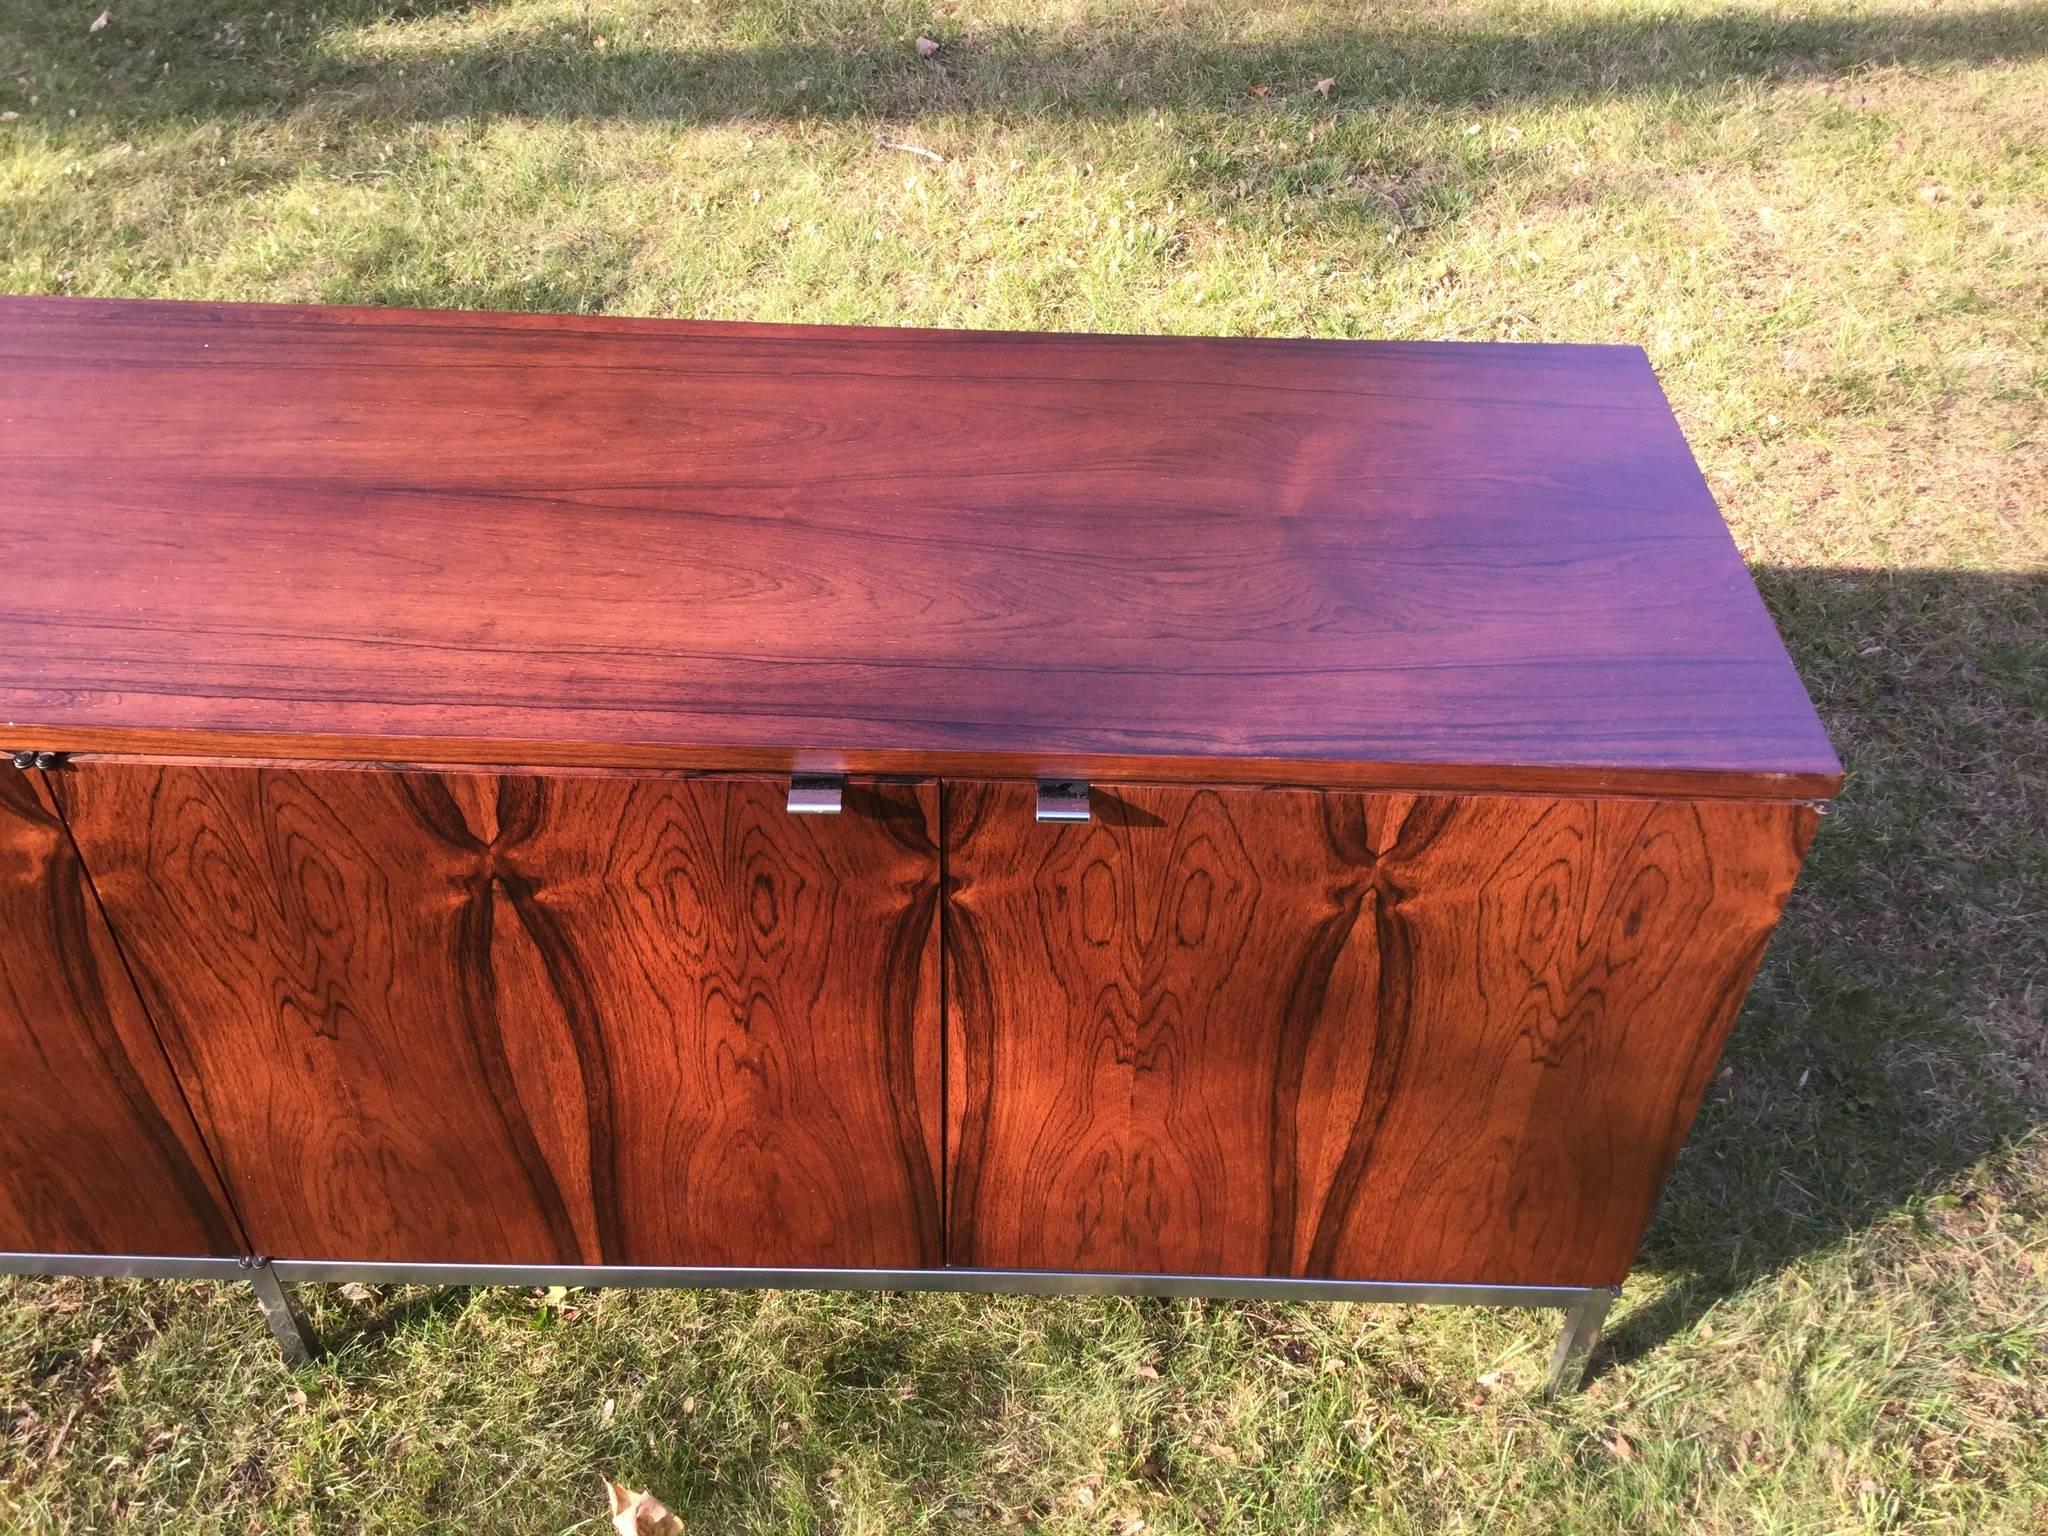 A stunning Mid-Century Modern rosewood Florence Knoll credenza.
This piece is in amazing condition.
The grain is really incredible.
It is clean and ready to go.
Matching smaller cabinet and 8 foot oval matching table is available in another